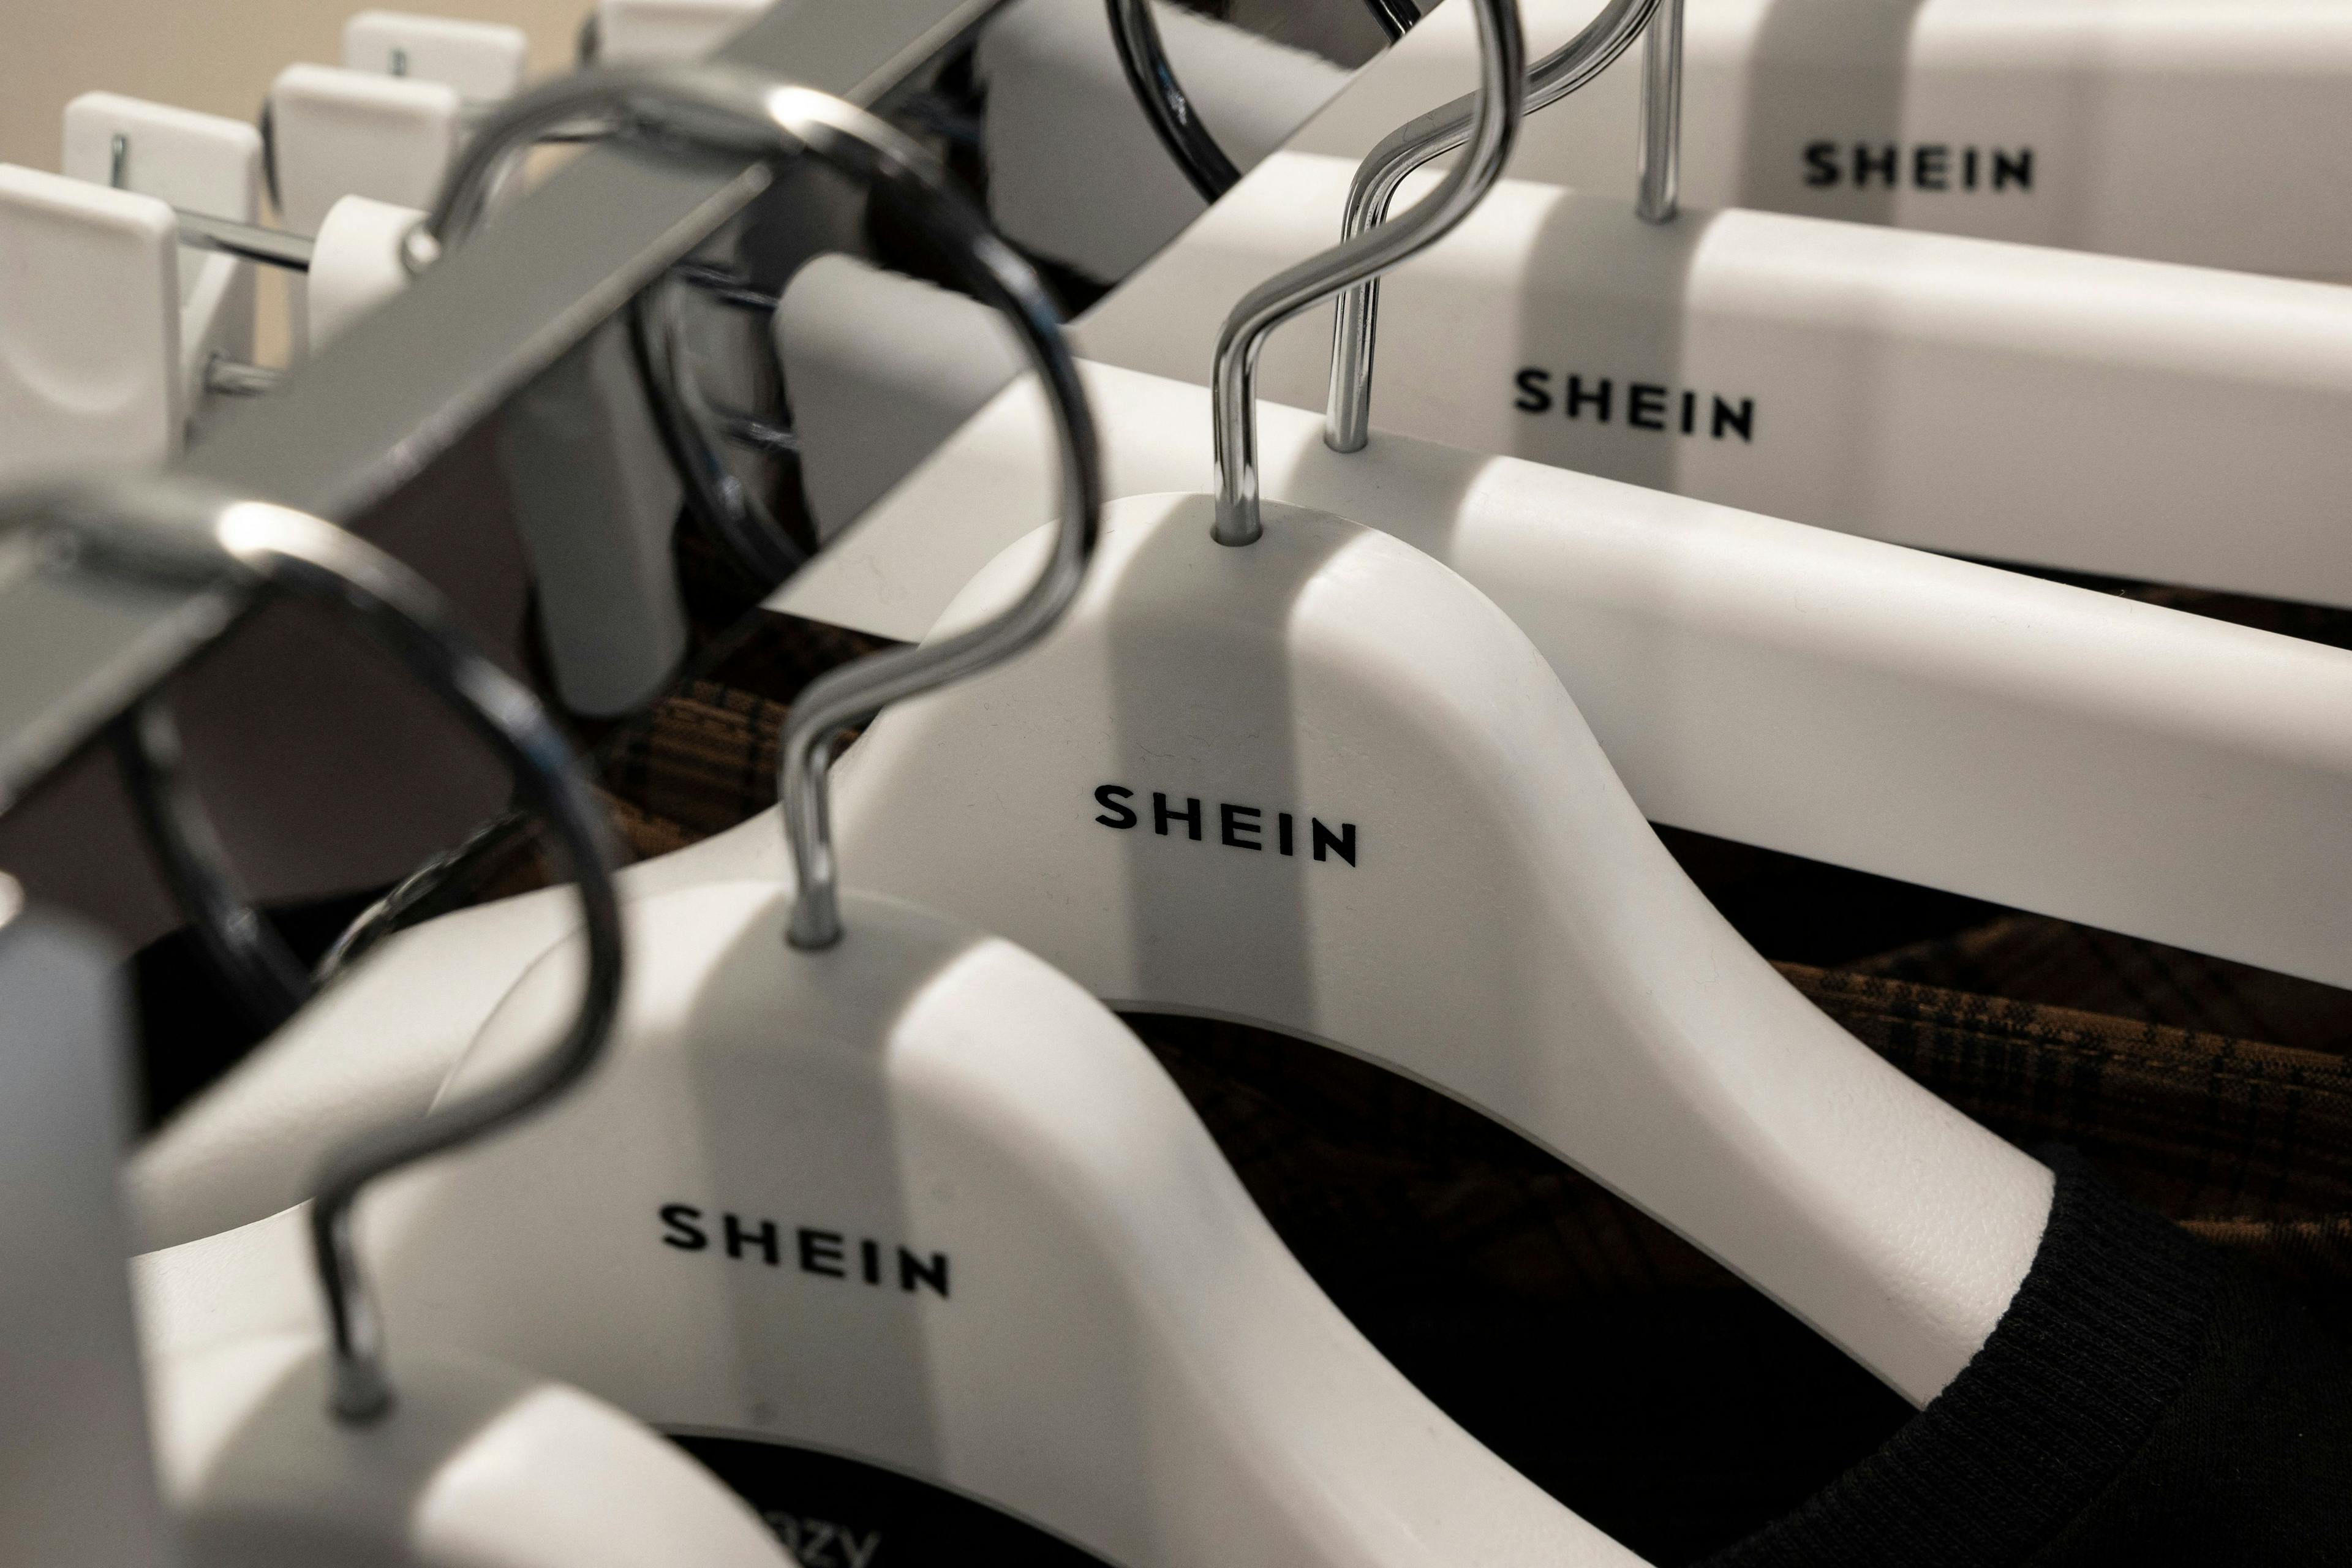 Shein hangers on a store rack